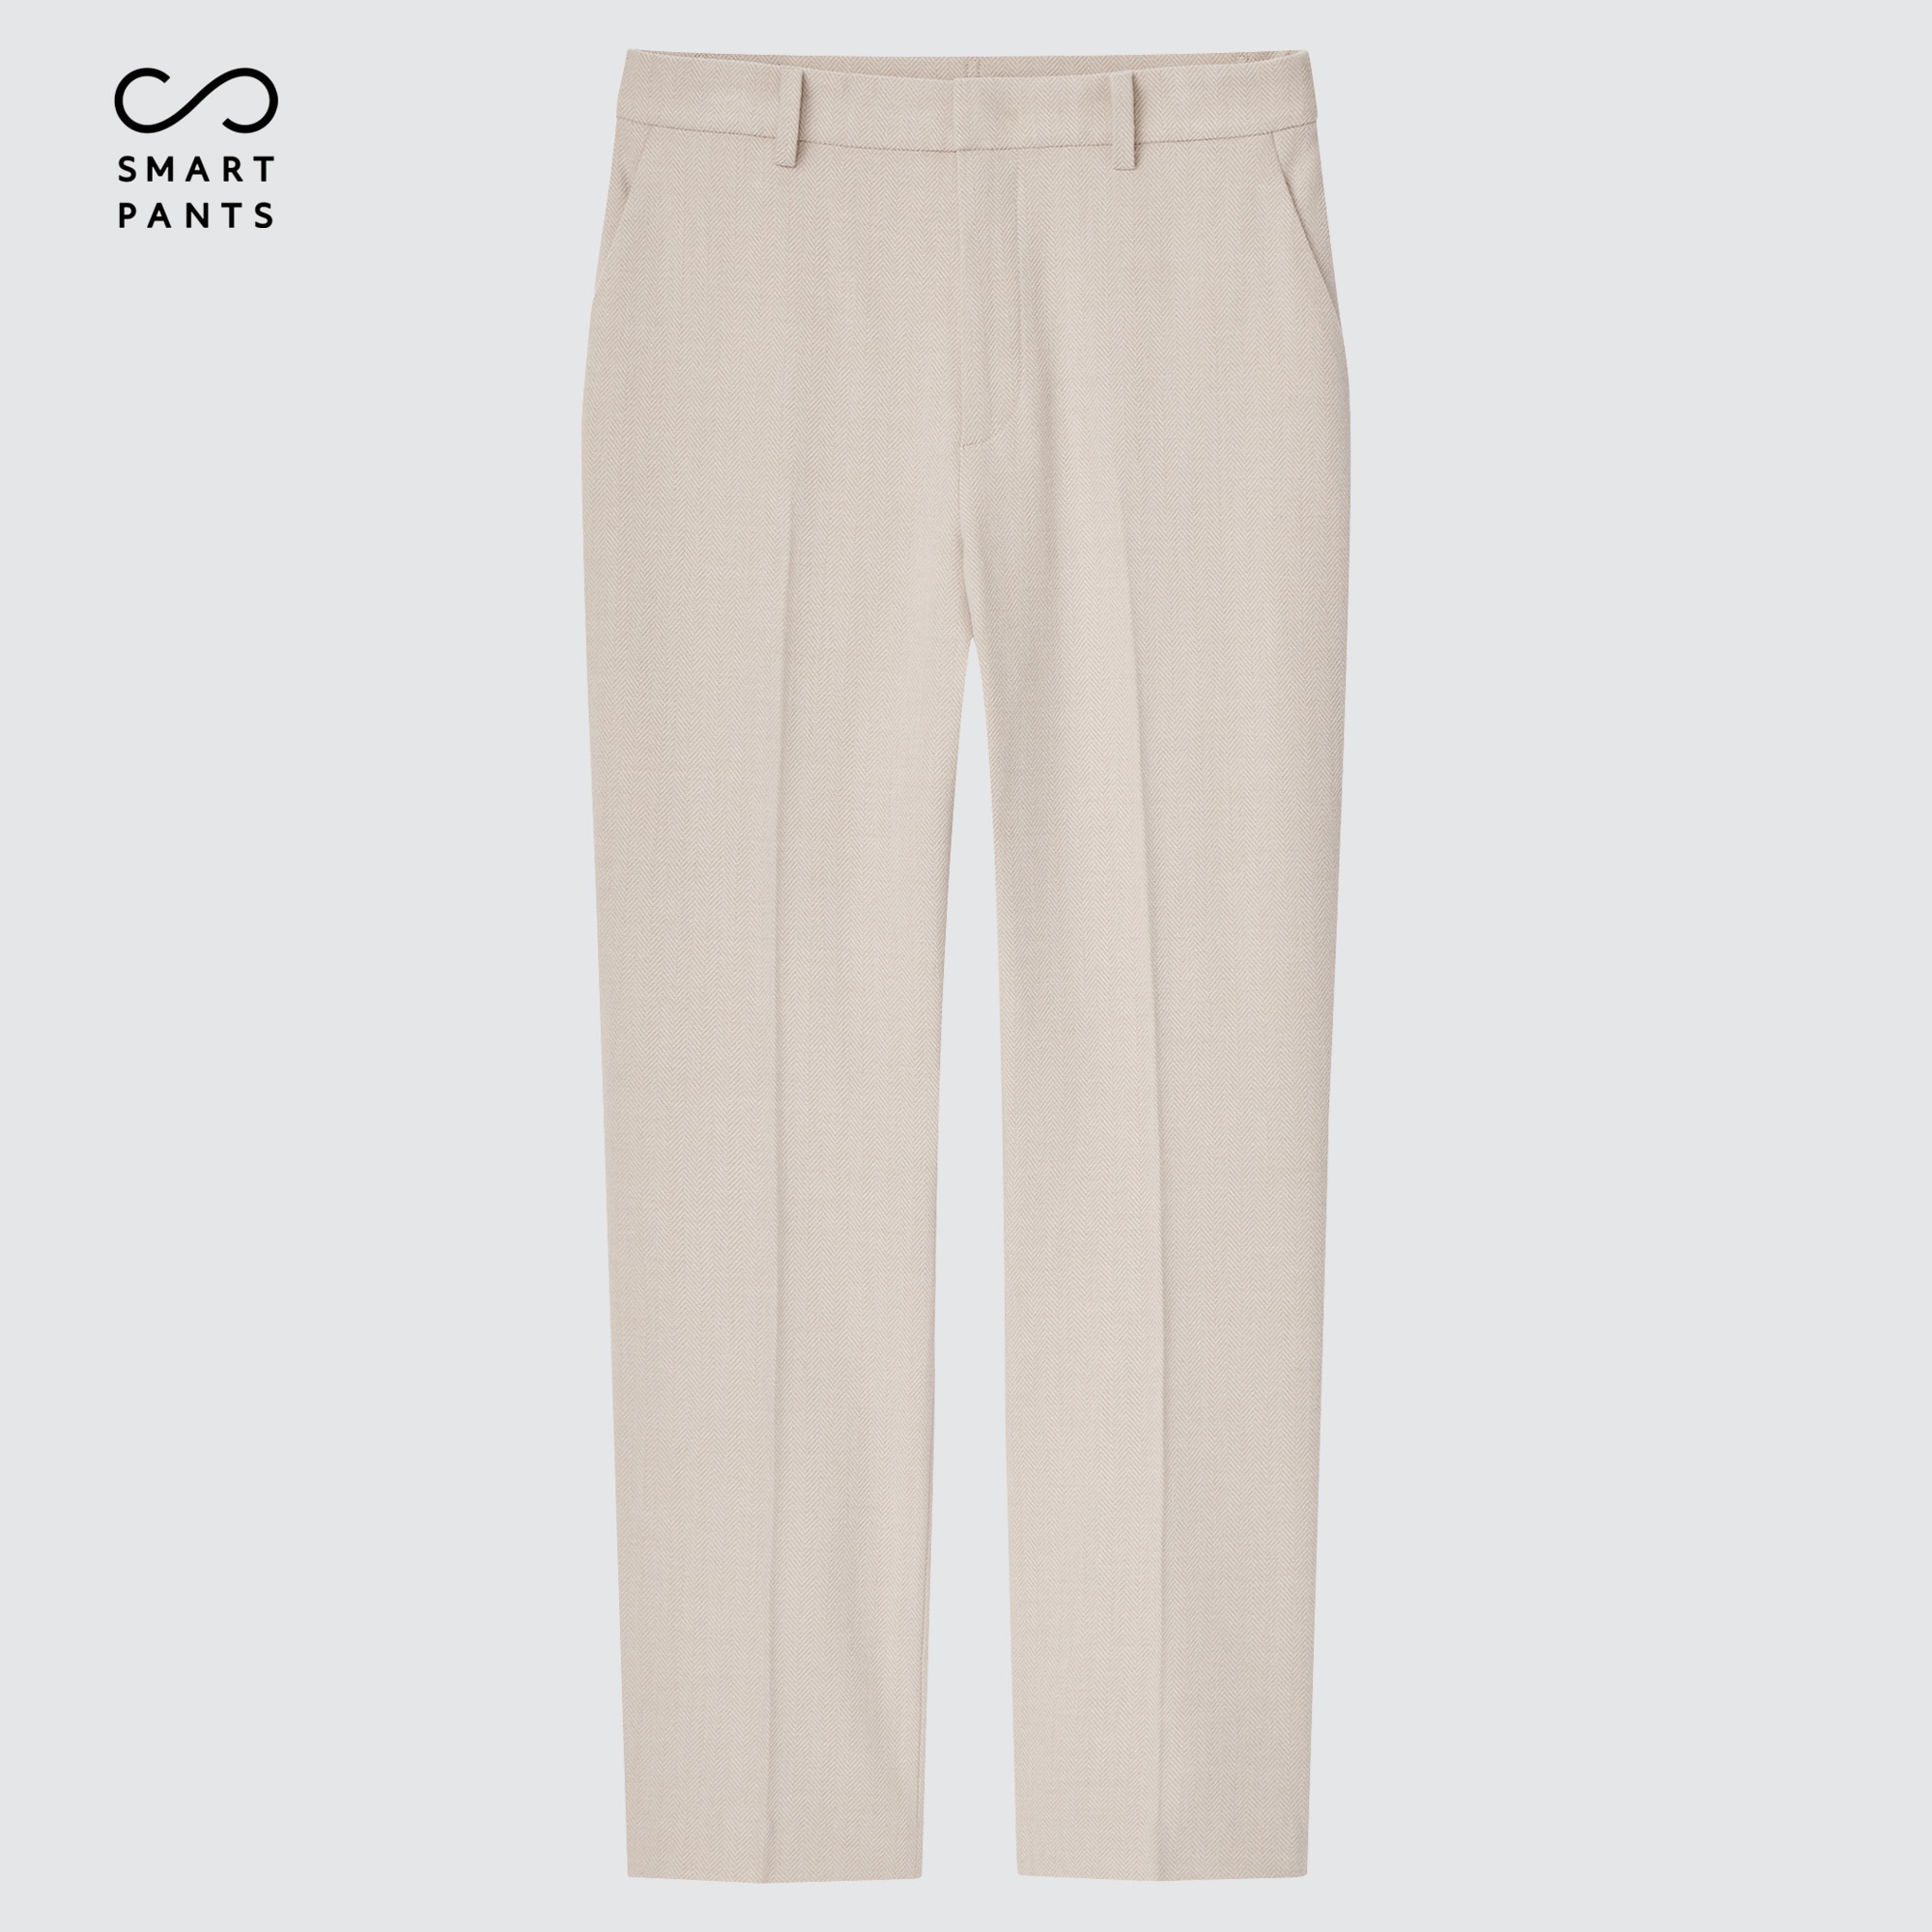 UNIQLO Smart 2-Way Stretch Brushed Ankle Pants